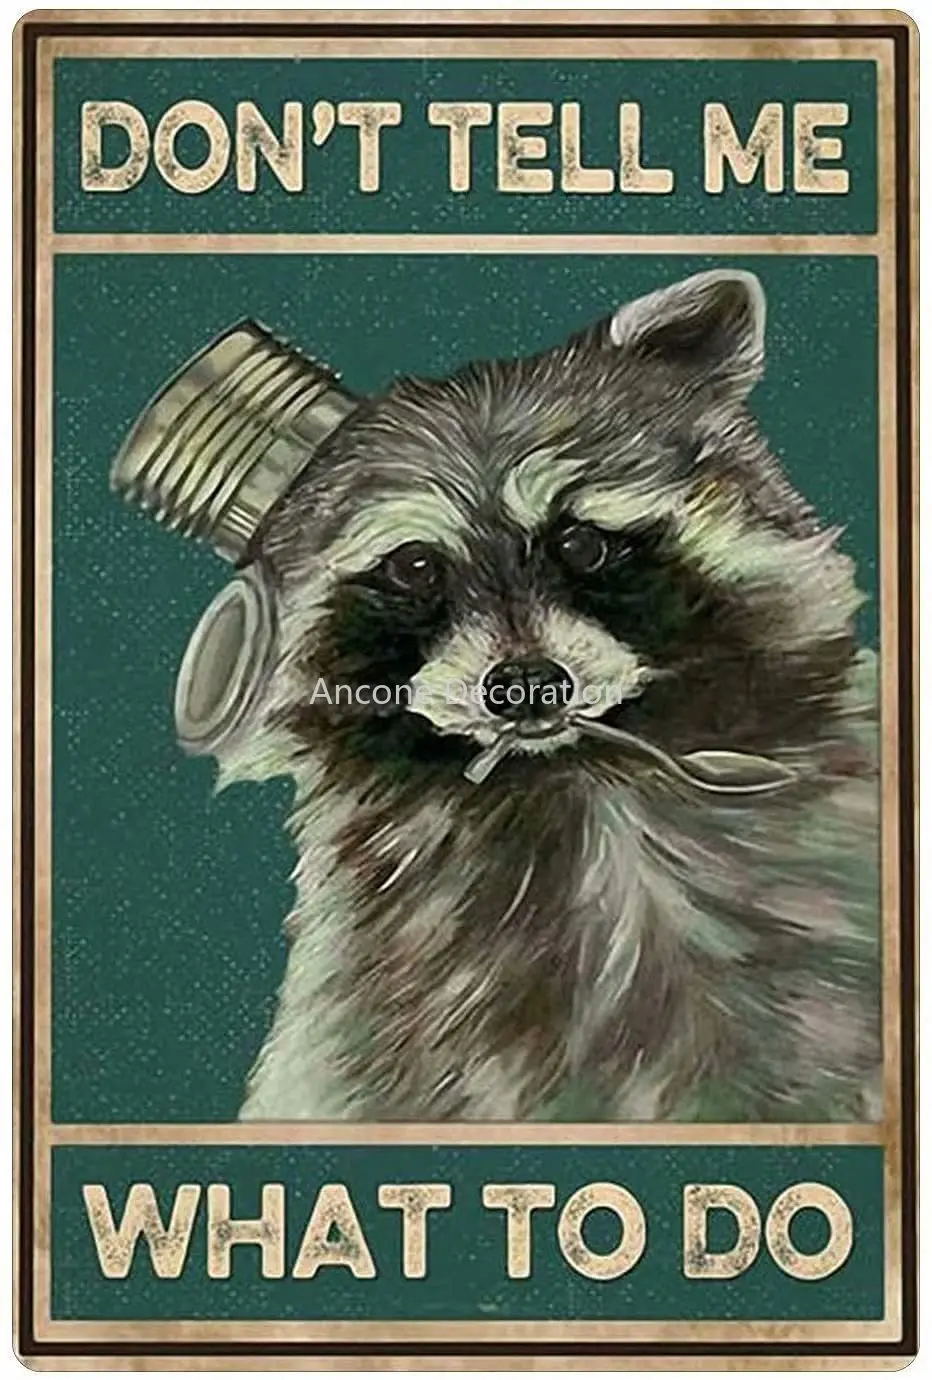 

Funny Raccoon Eat Canned Food Metal Tin Sign,Don't Tell Me What to Do,Aluminum Sign Wall Decoration for Home Kitchen Wall Art